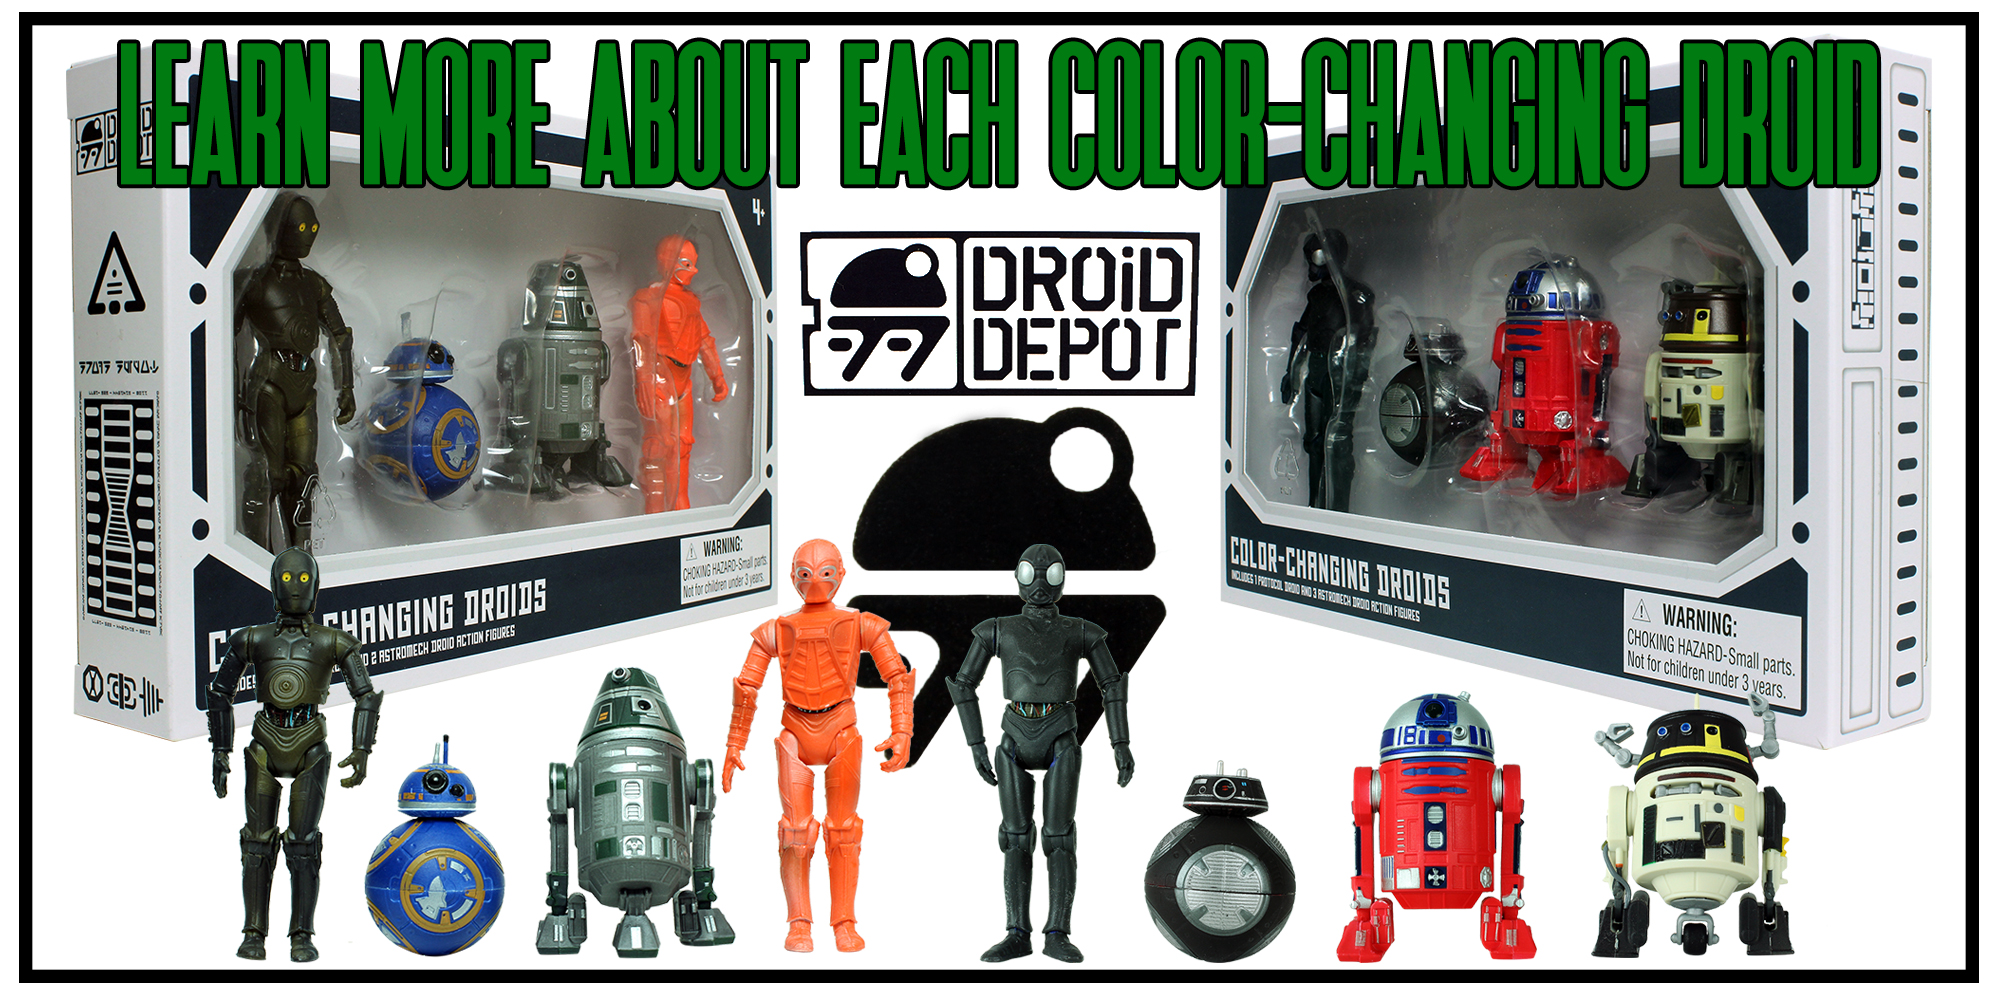 Learn More About The Color-Changing Droids